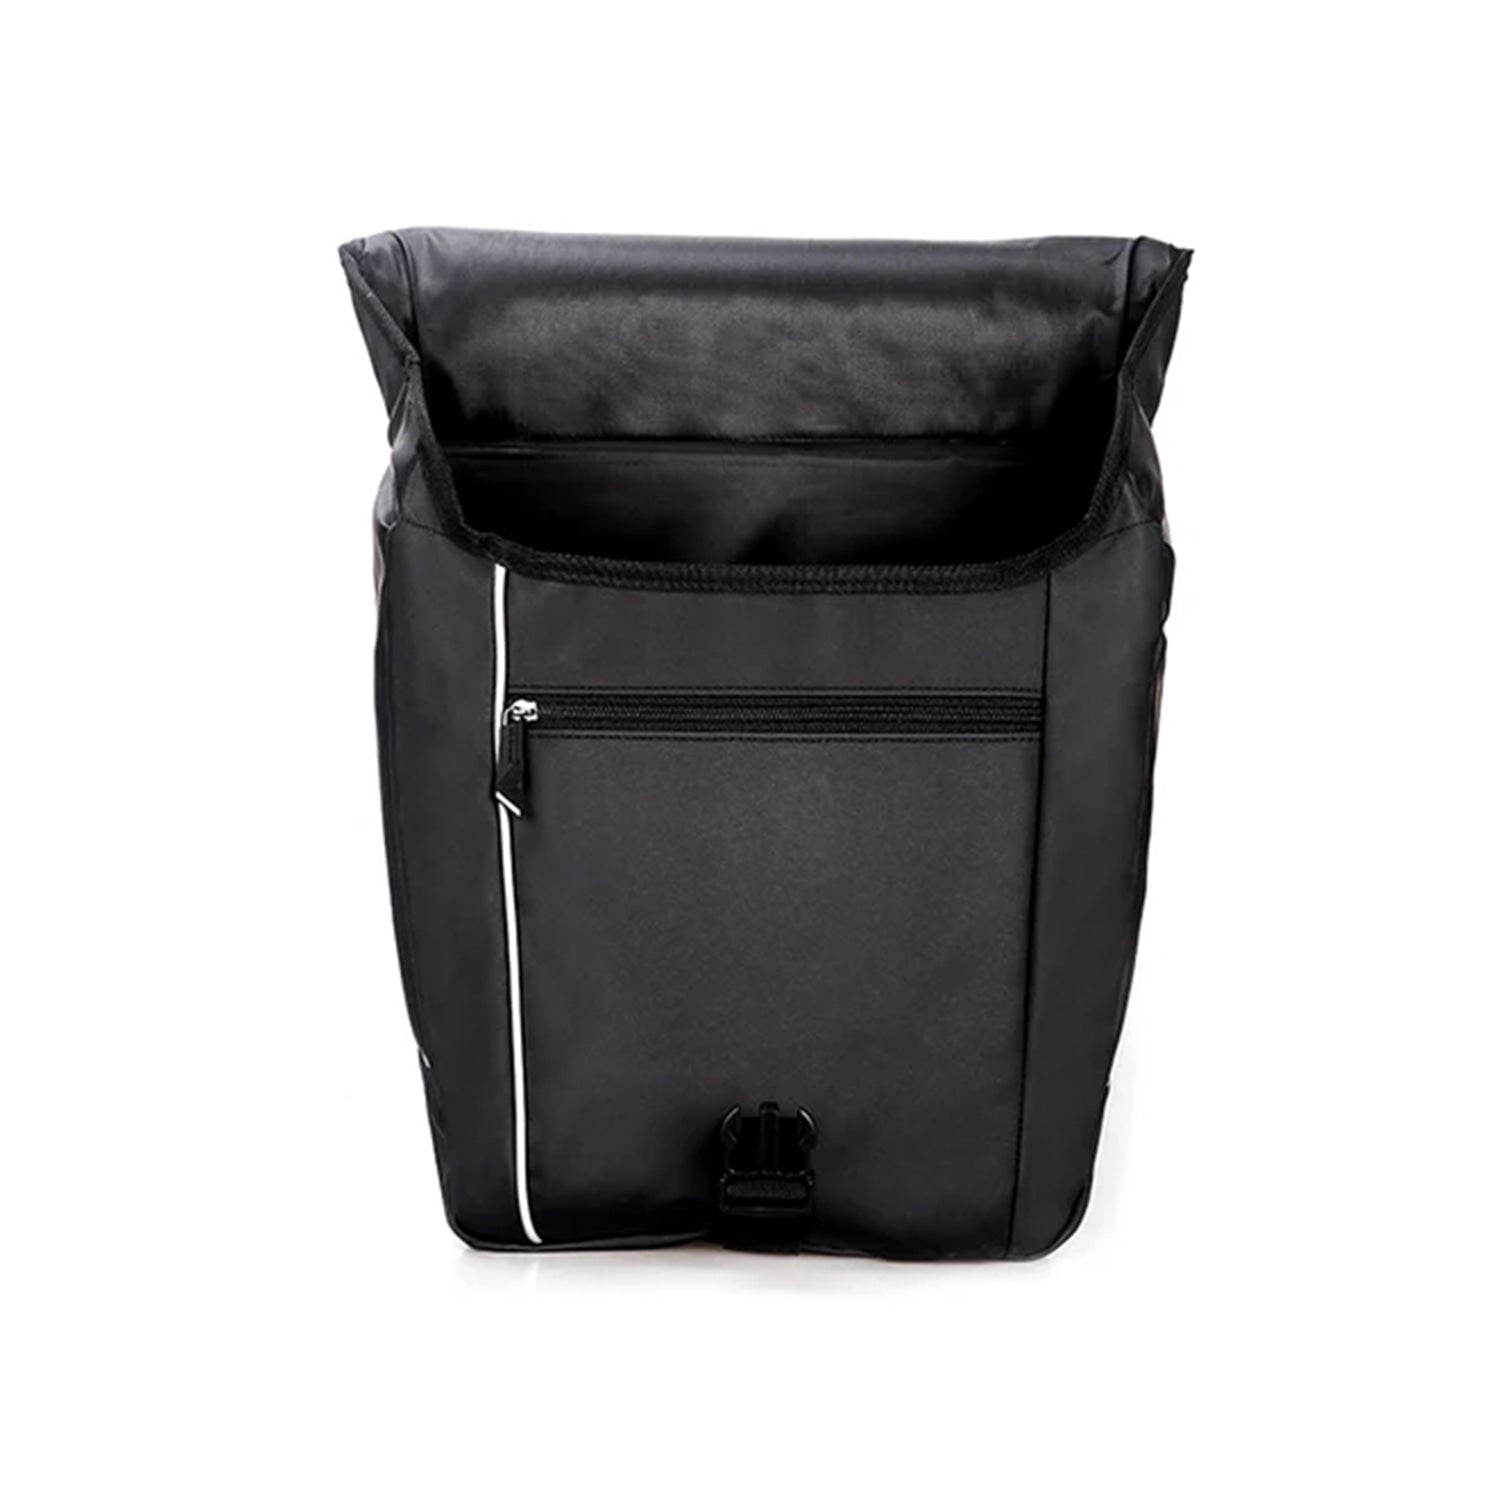 Waterproof Bicycle Pannier Bag with Rain Cover